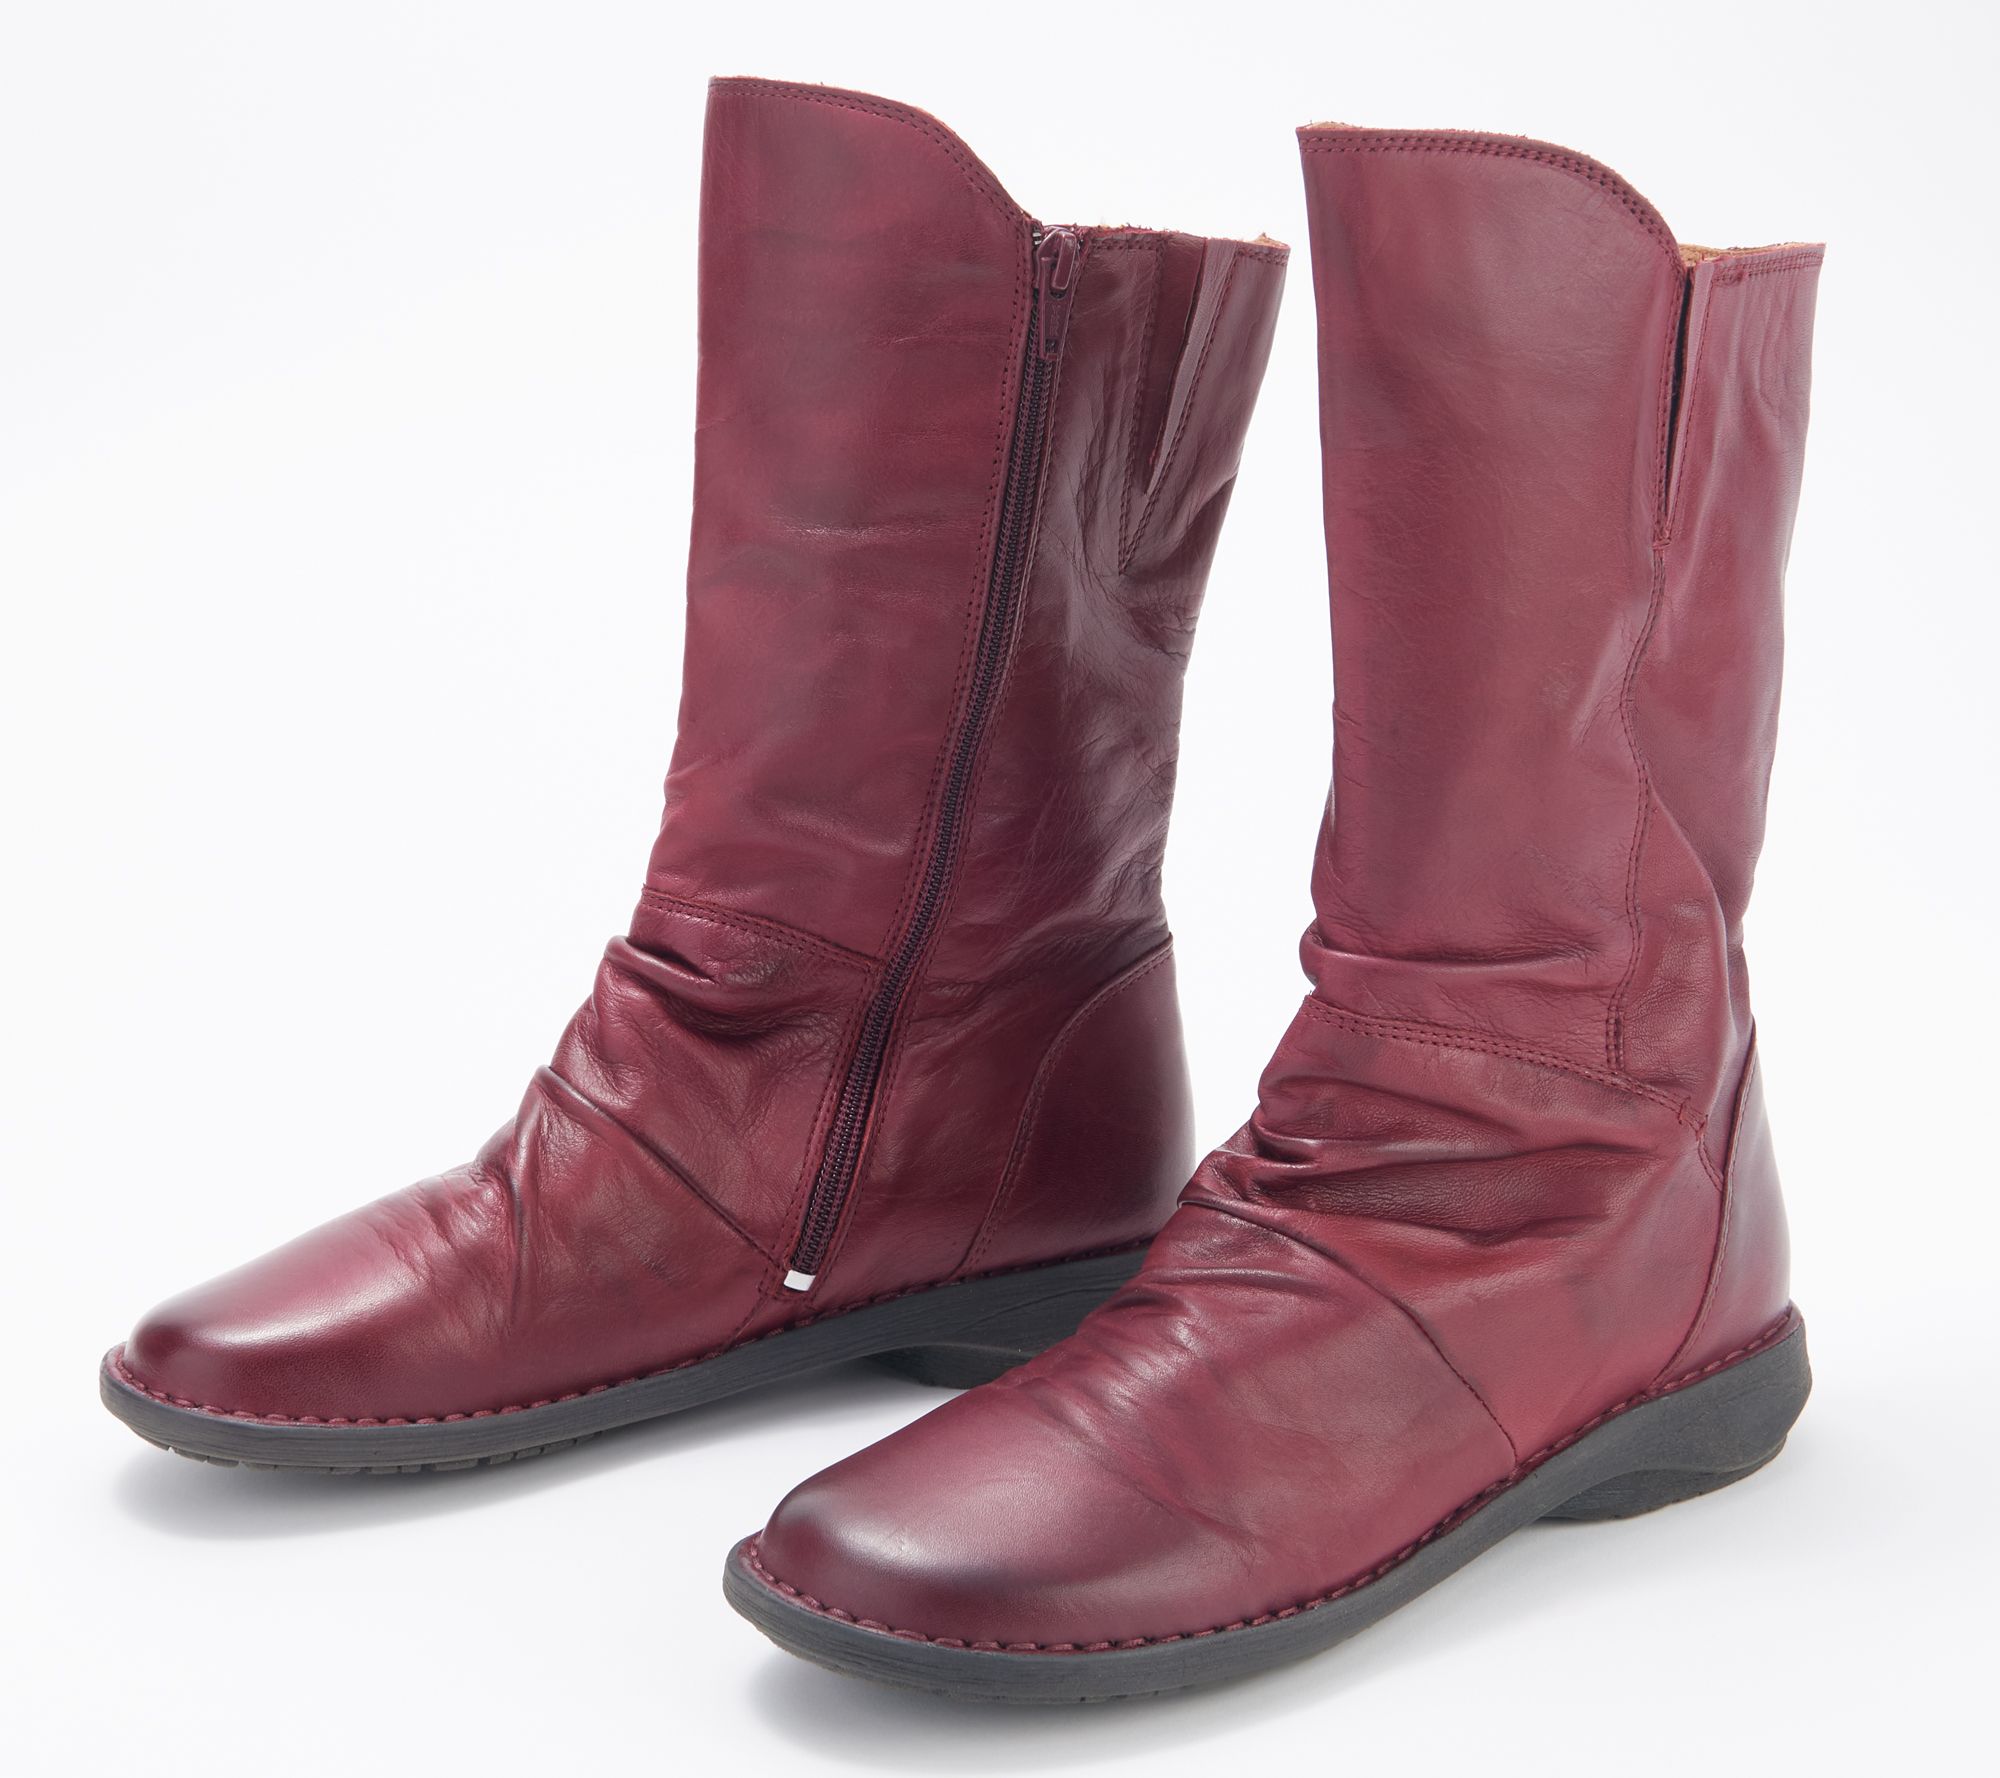 Miz Mooz Leather Wide Width Ruched Ankle Boots- Pleasant - QVC.com